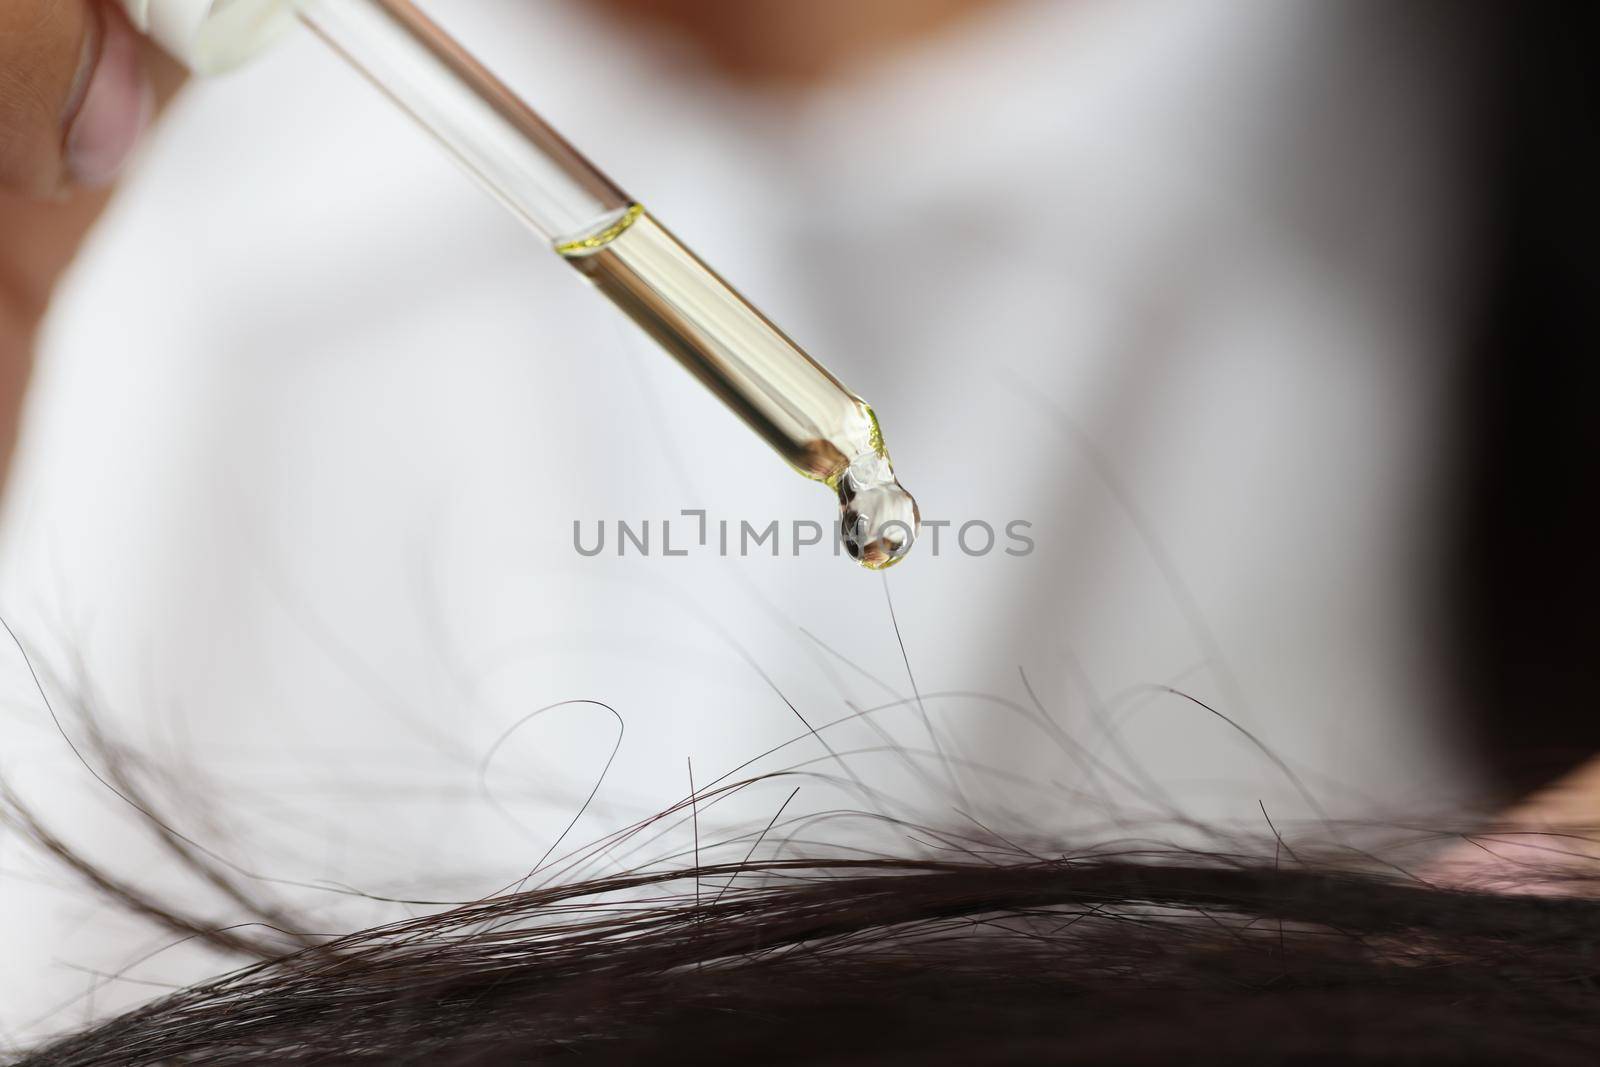 Oil from a pipette drips onto the hair on the head by kuprevich